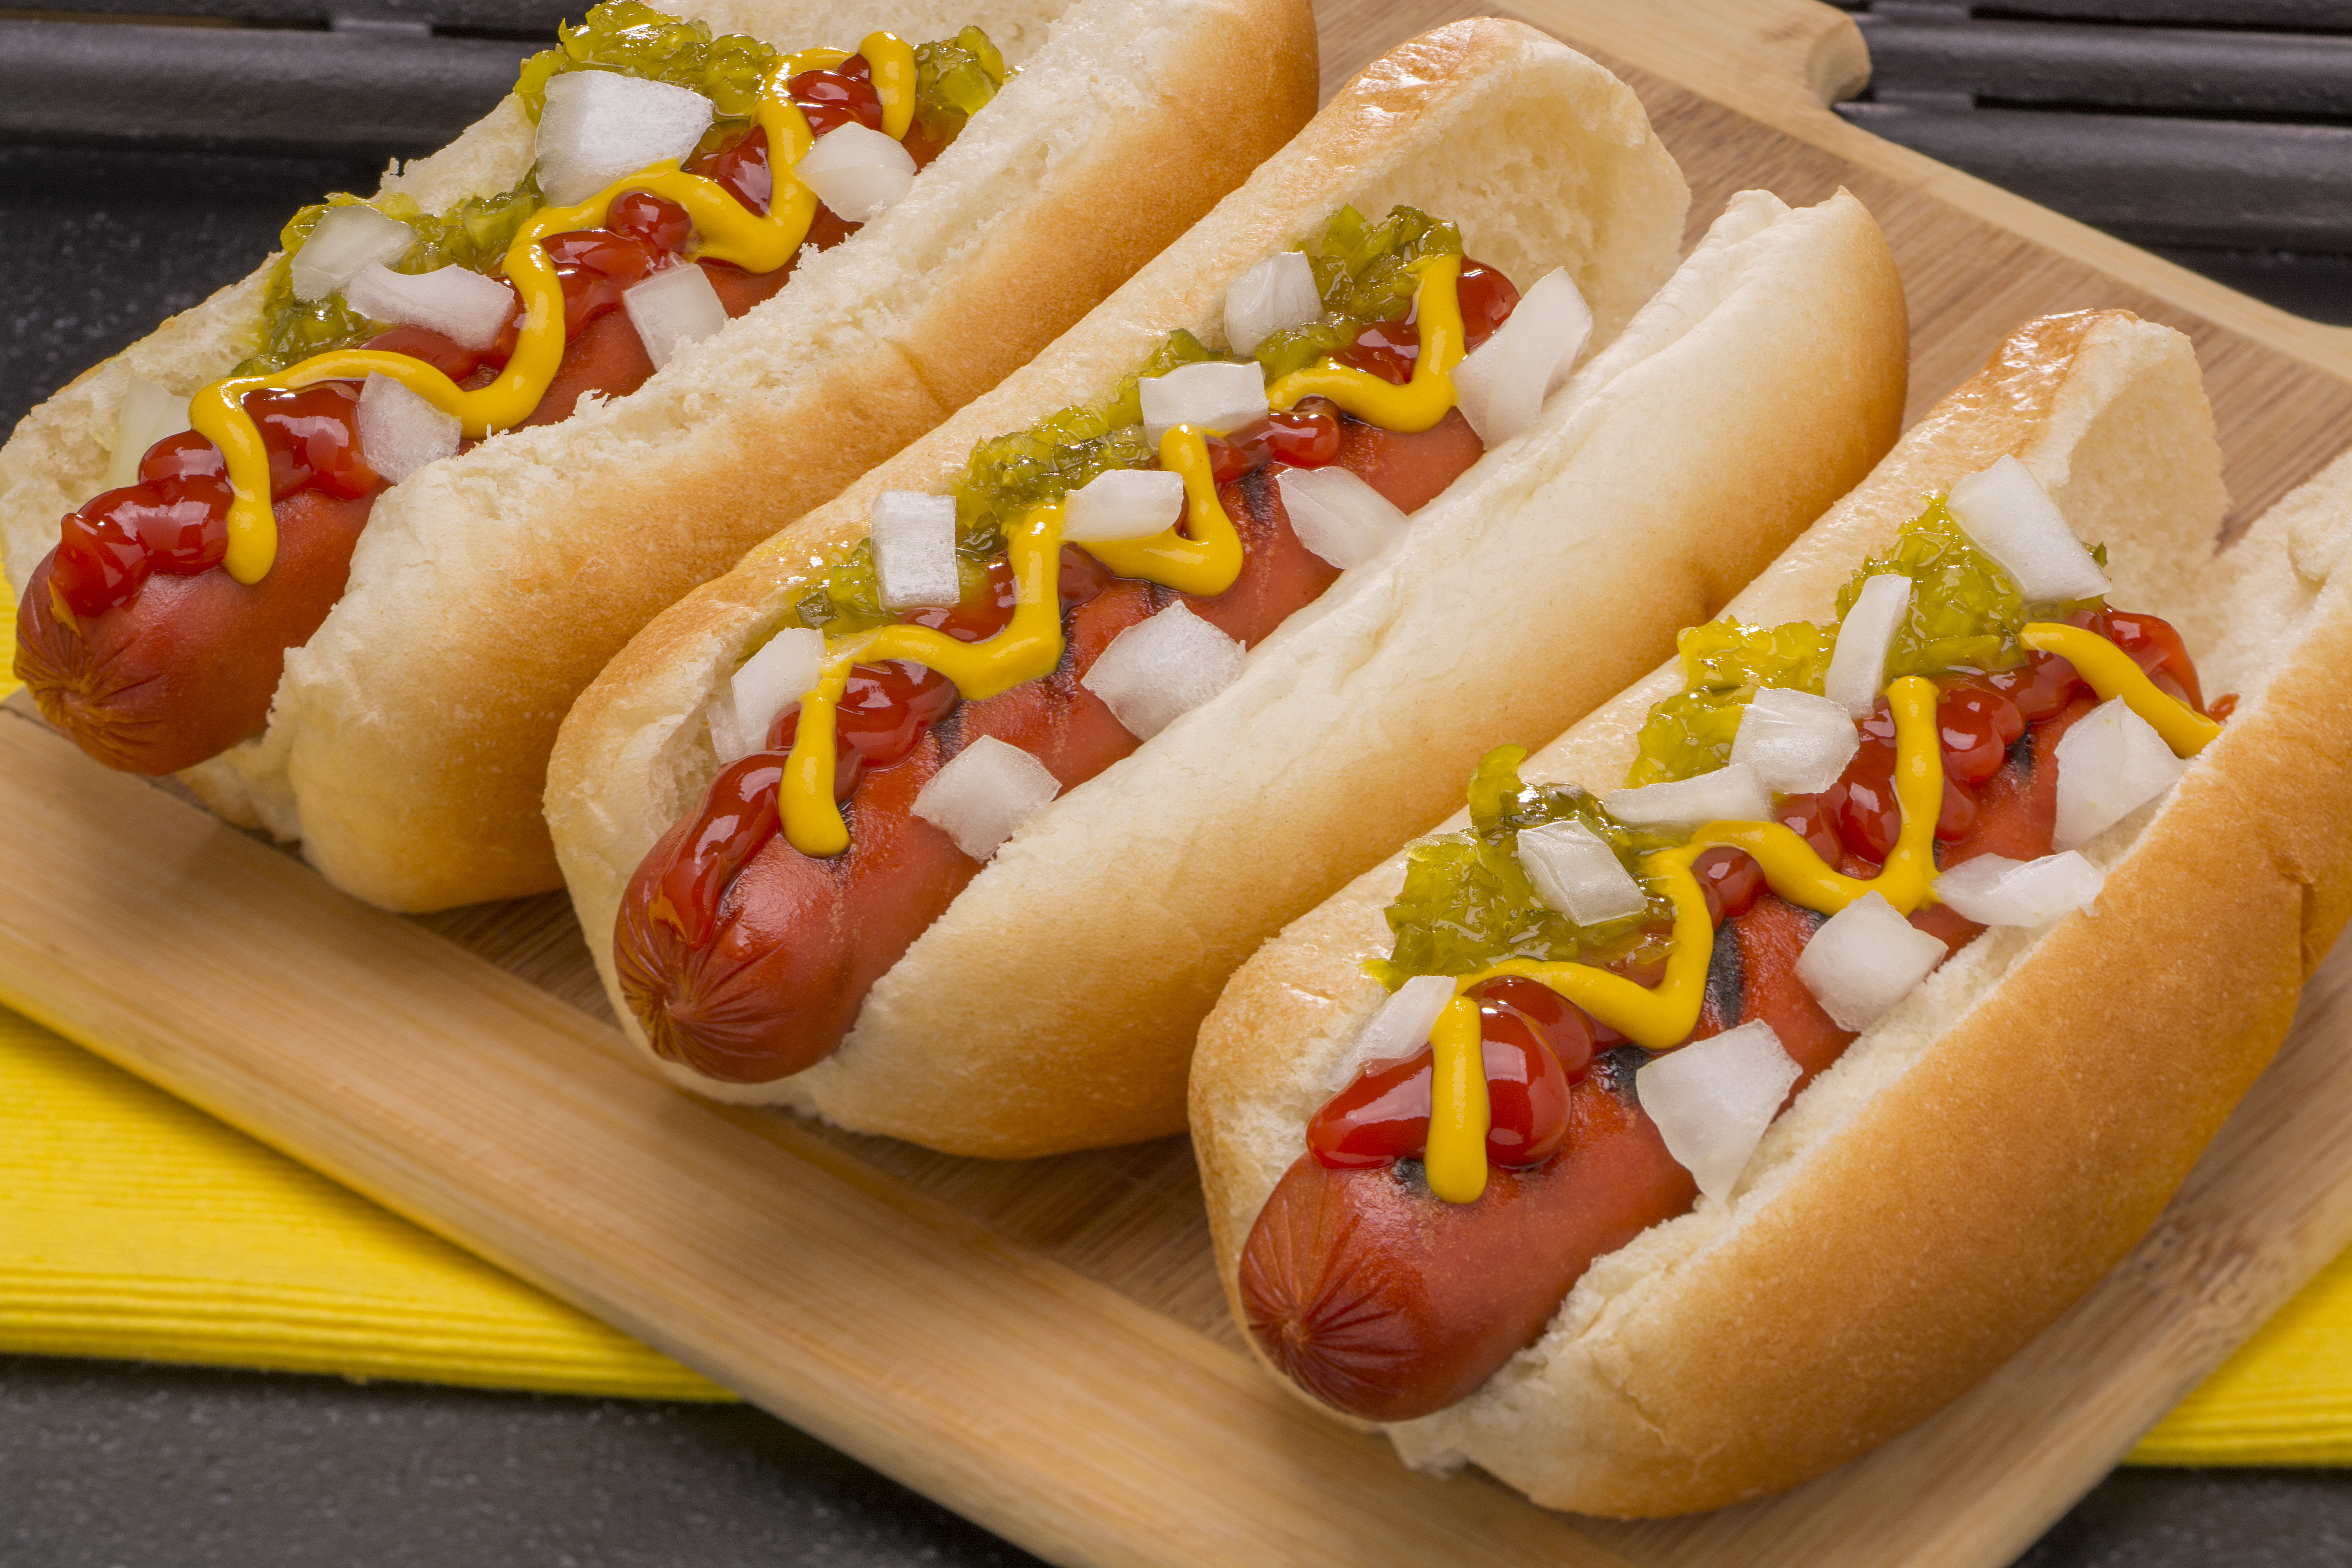 A close up image of three hot dogs topped with relish, onion and mustard